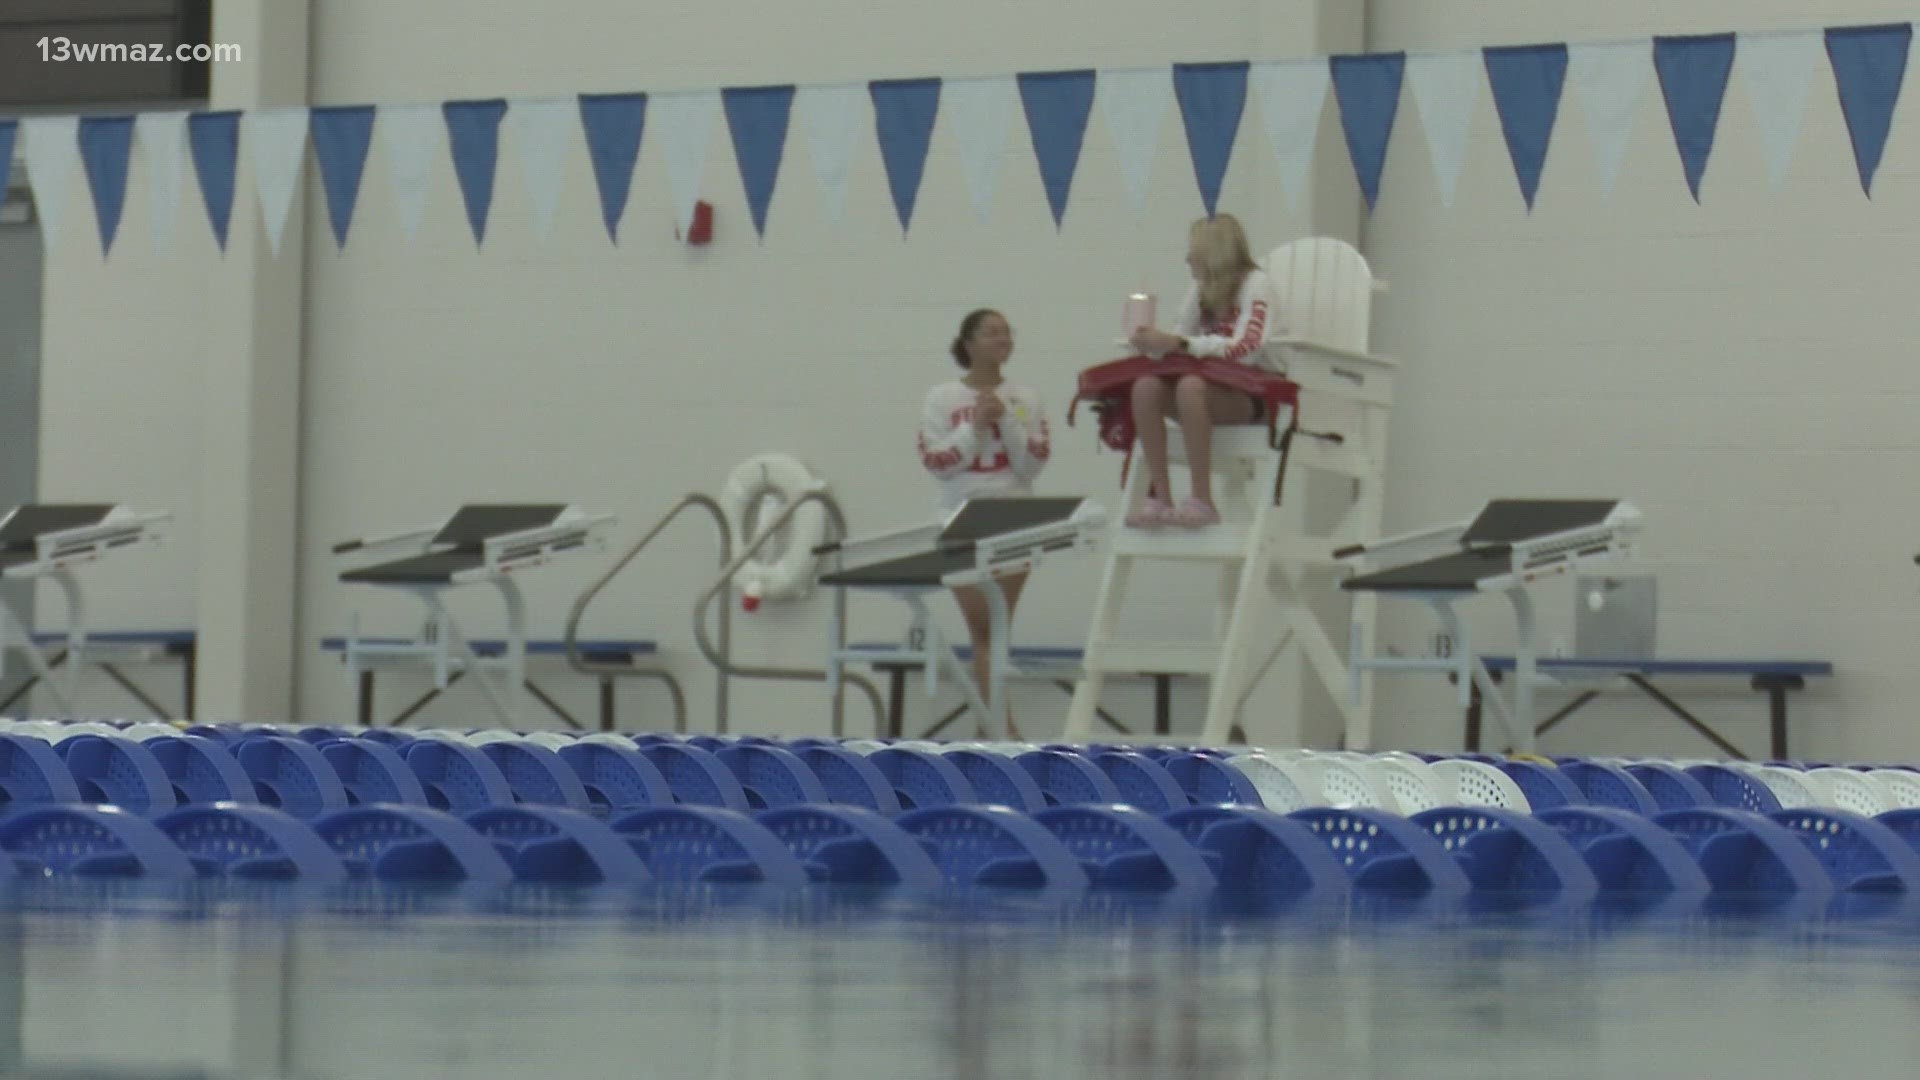 The facility opens to the public on March 1, but local high school athletes are already feeling the facility's impact.